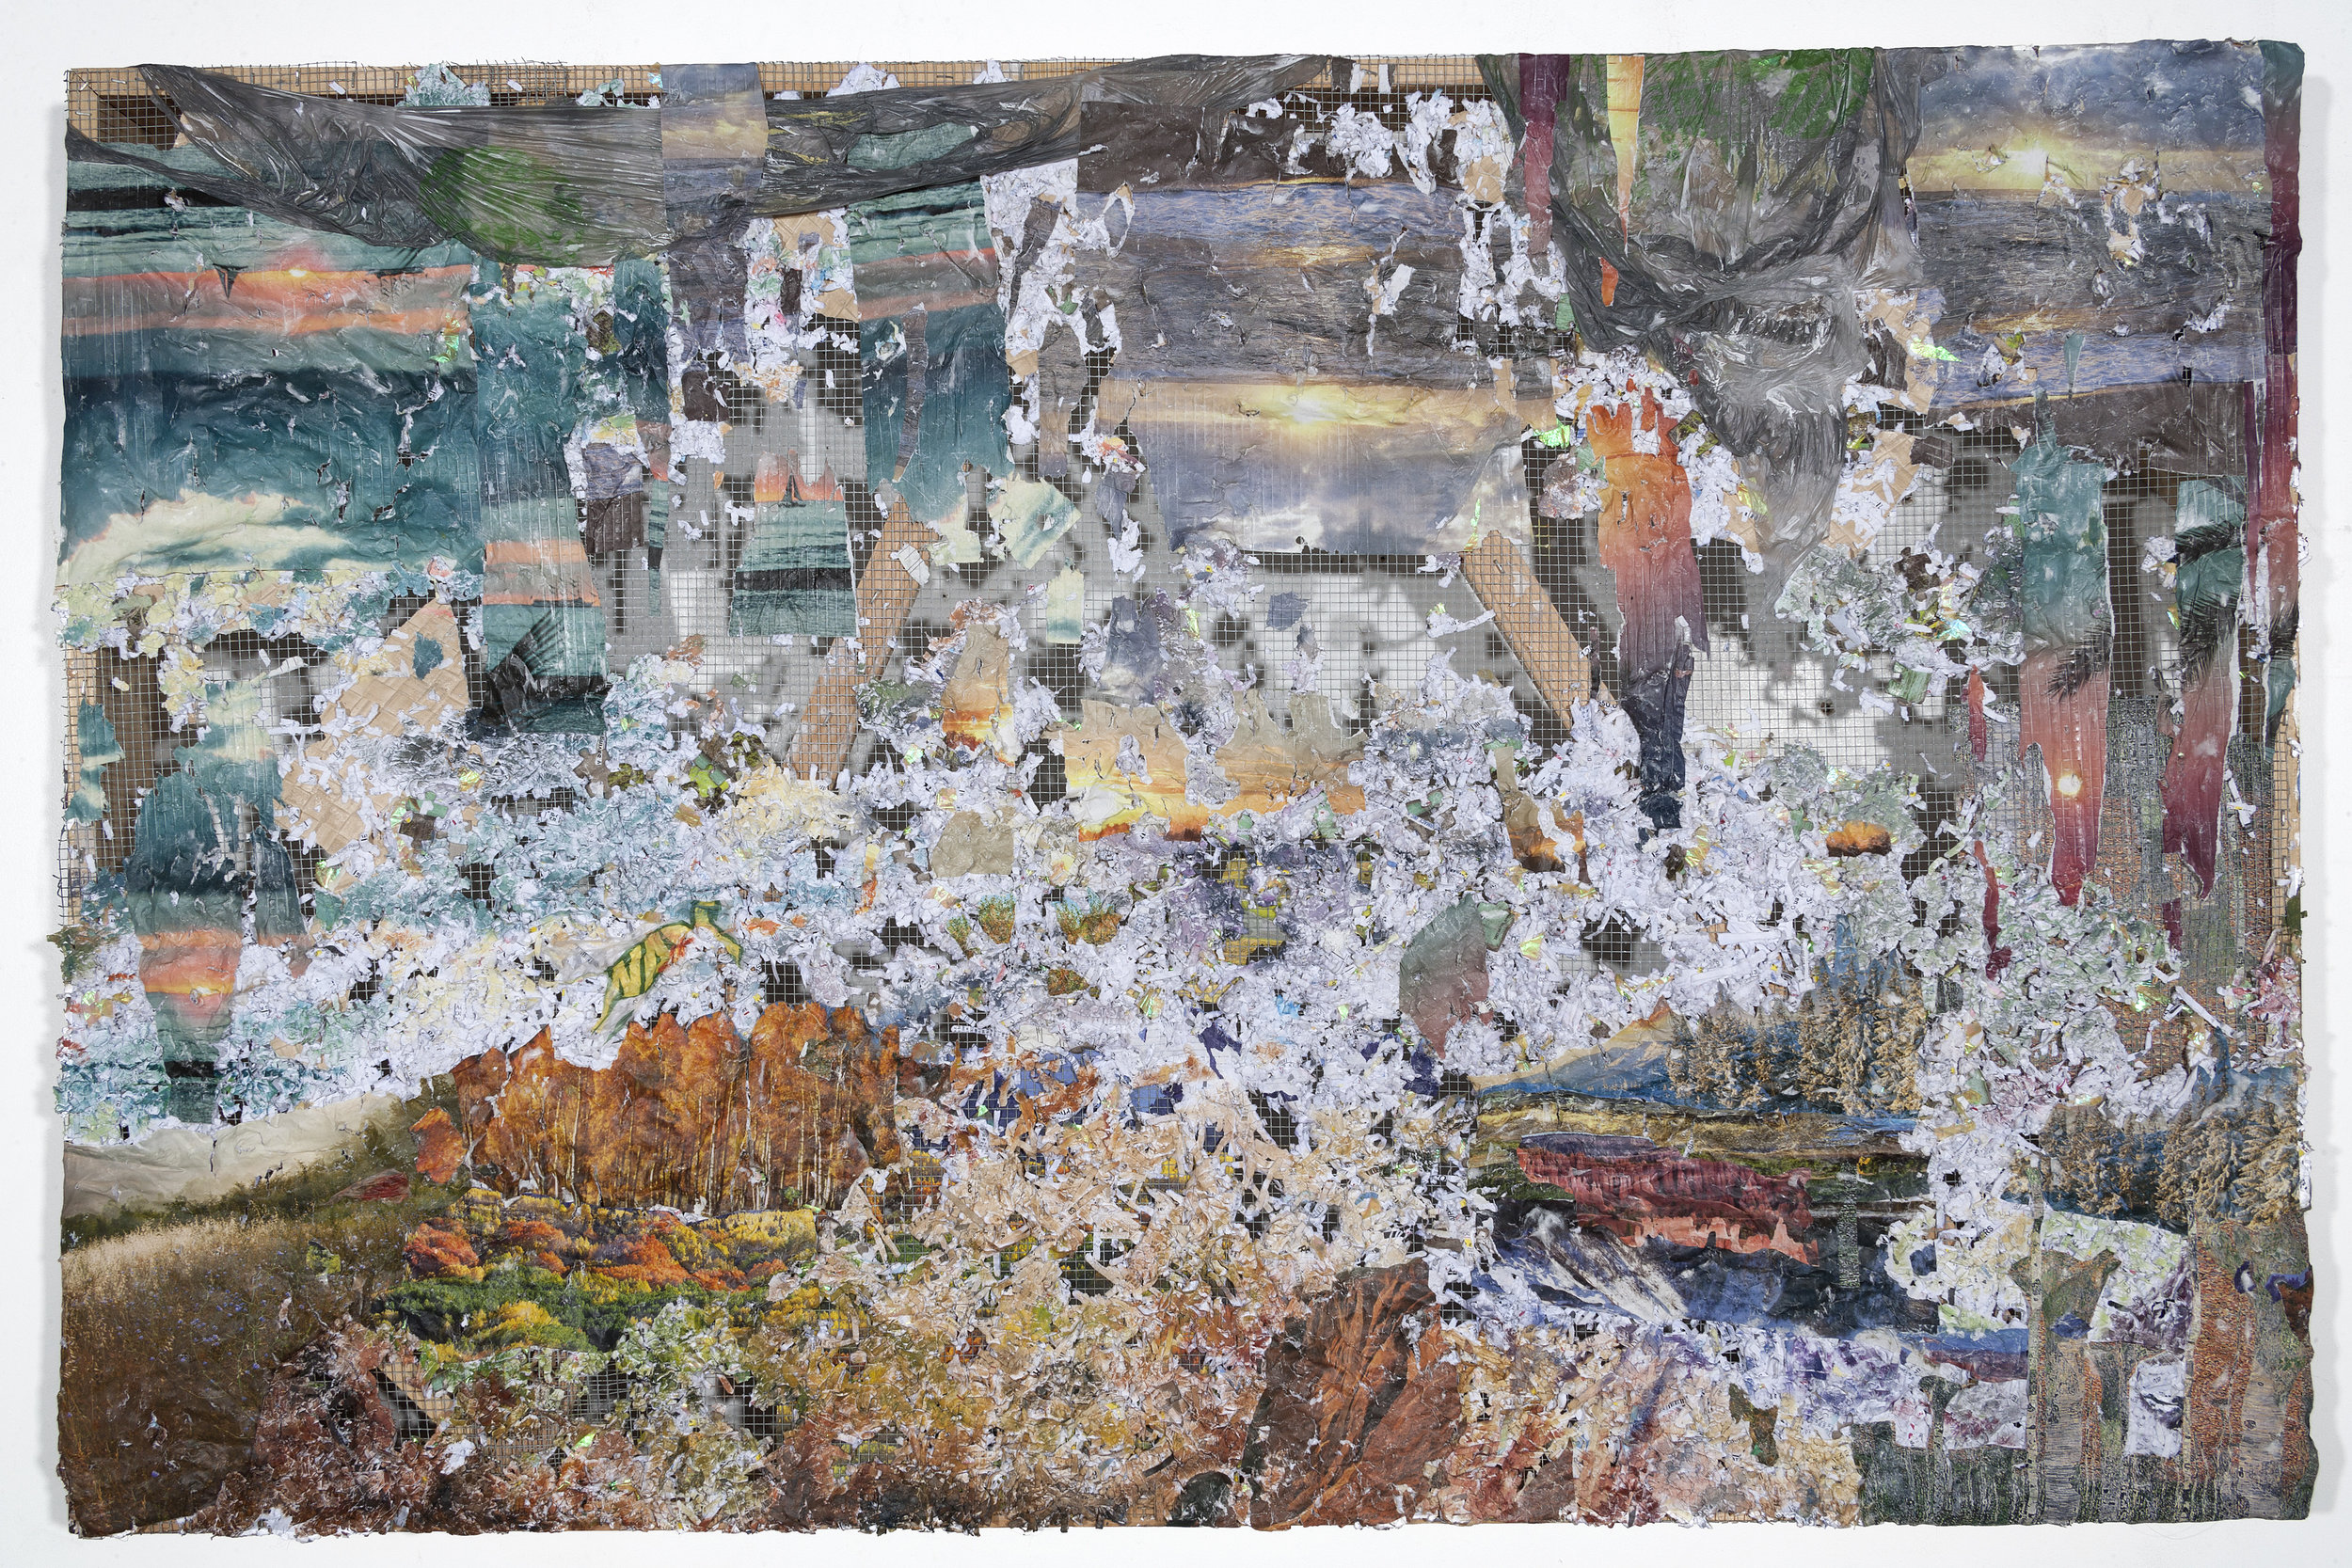   How Do I Raise the Ground Where I Land , 2017,&nbsp;Medical records, Banig print wallpaper, puzzle pieces, nature calendars, Dollar Tree and Subway bag, acrylic and oil on chicken wire and wood, 38 x 60 x 4 inches 